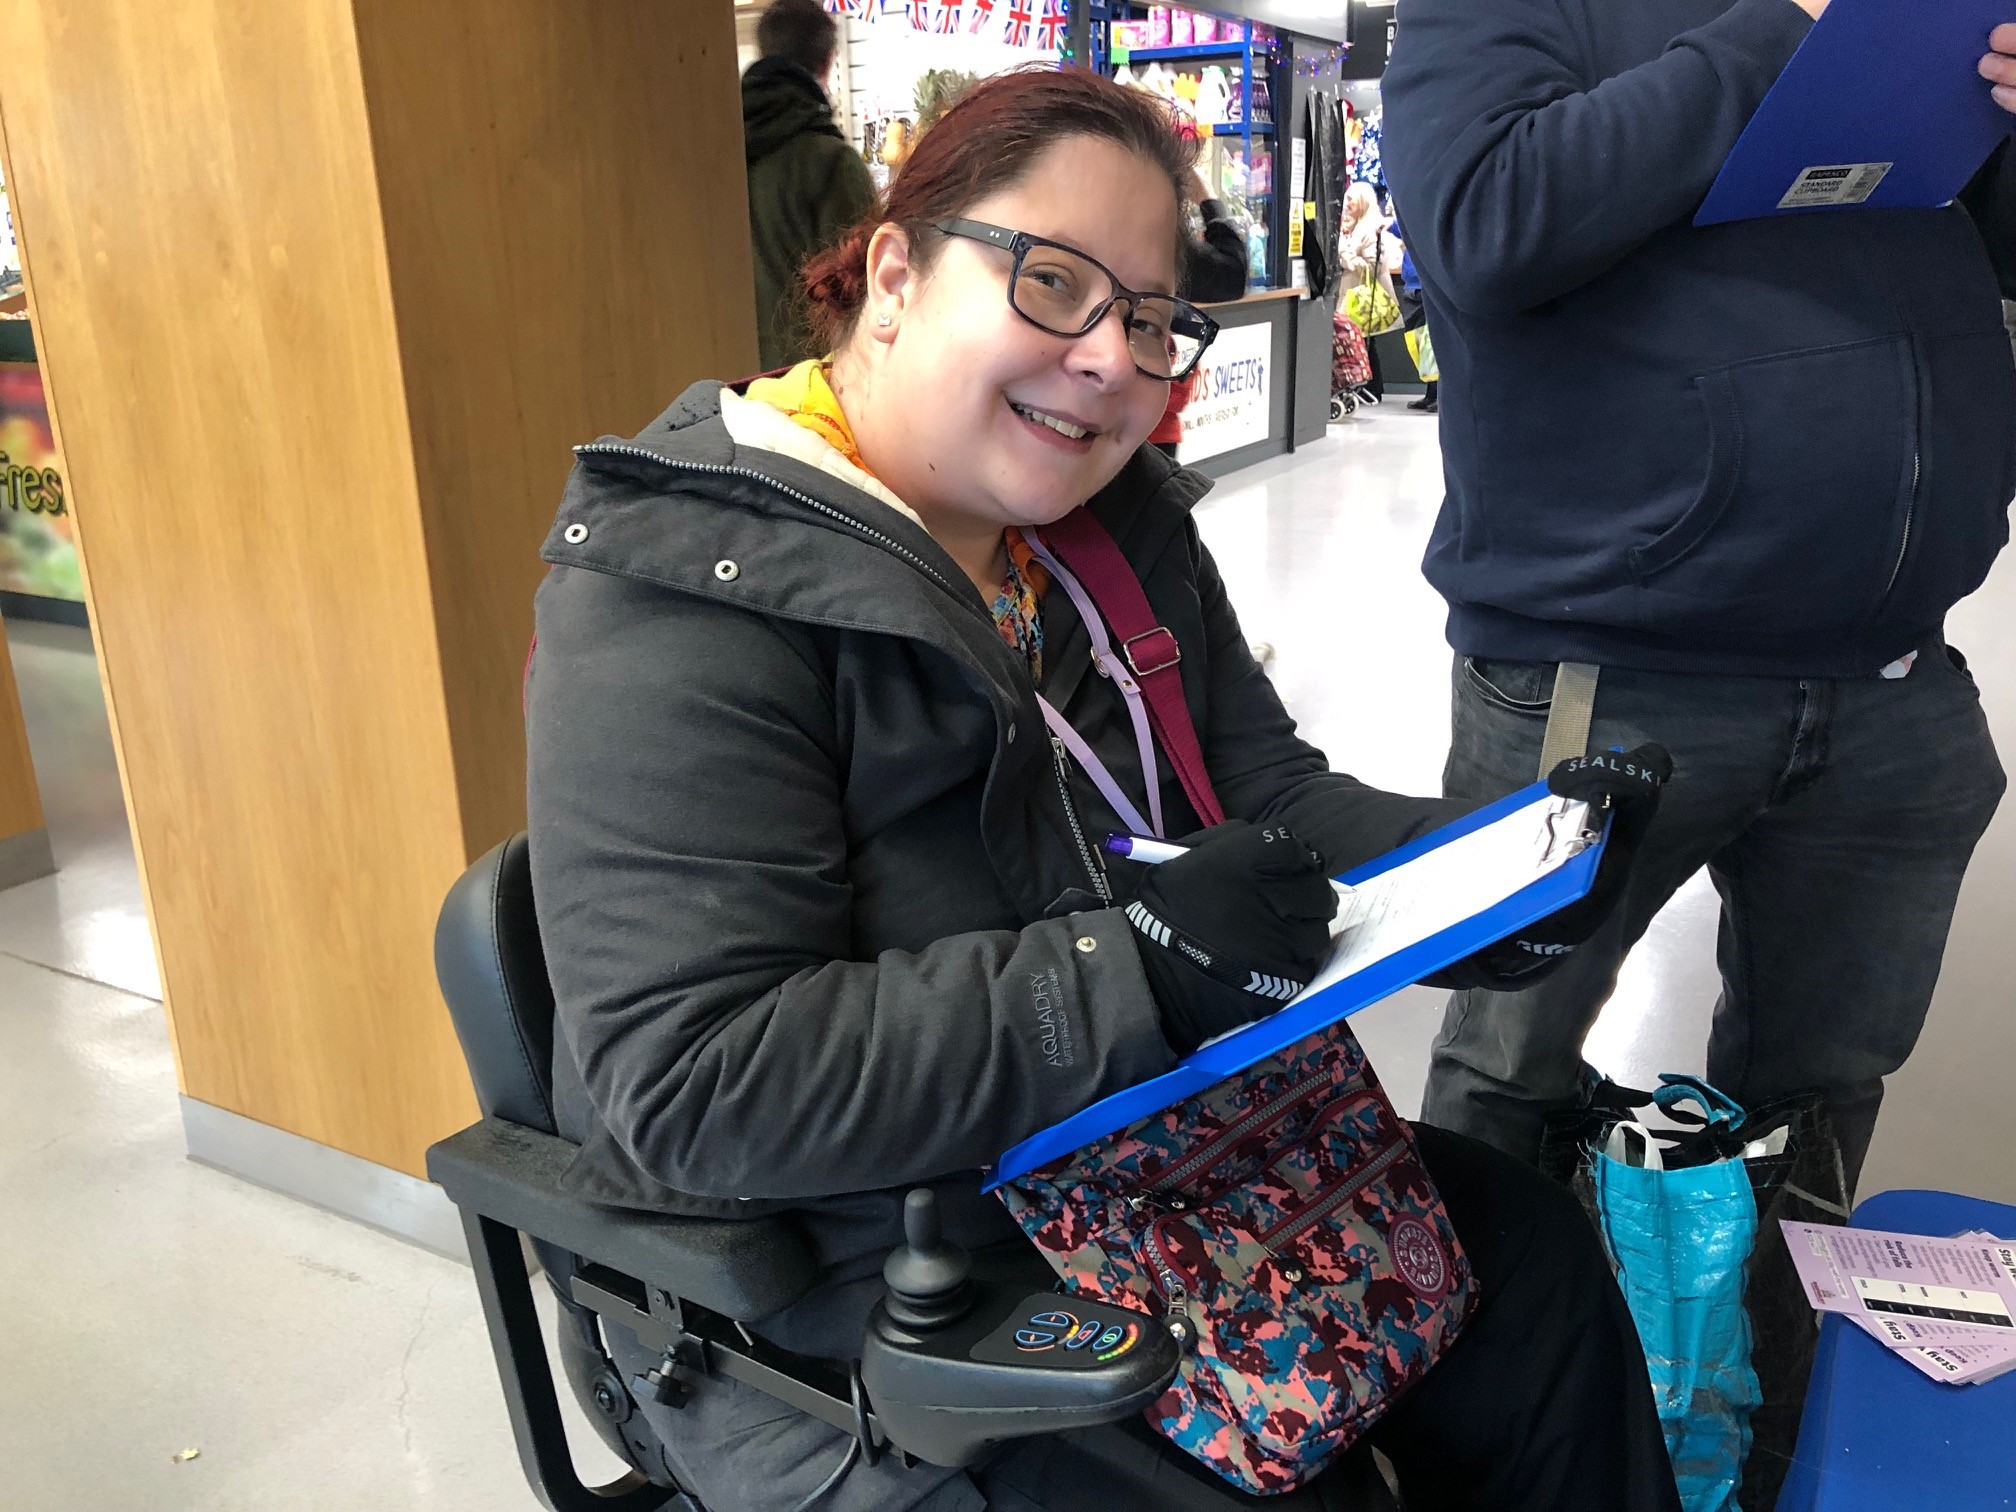 dark haired lady in a black coat sat in a wheelchair completing a survey